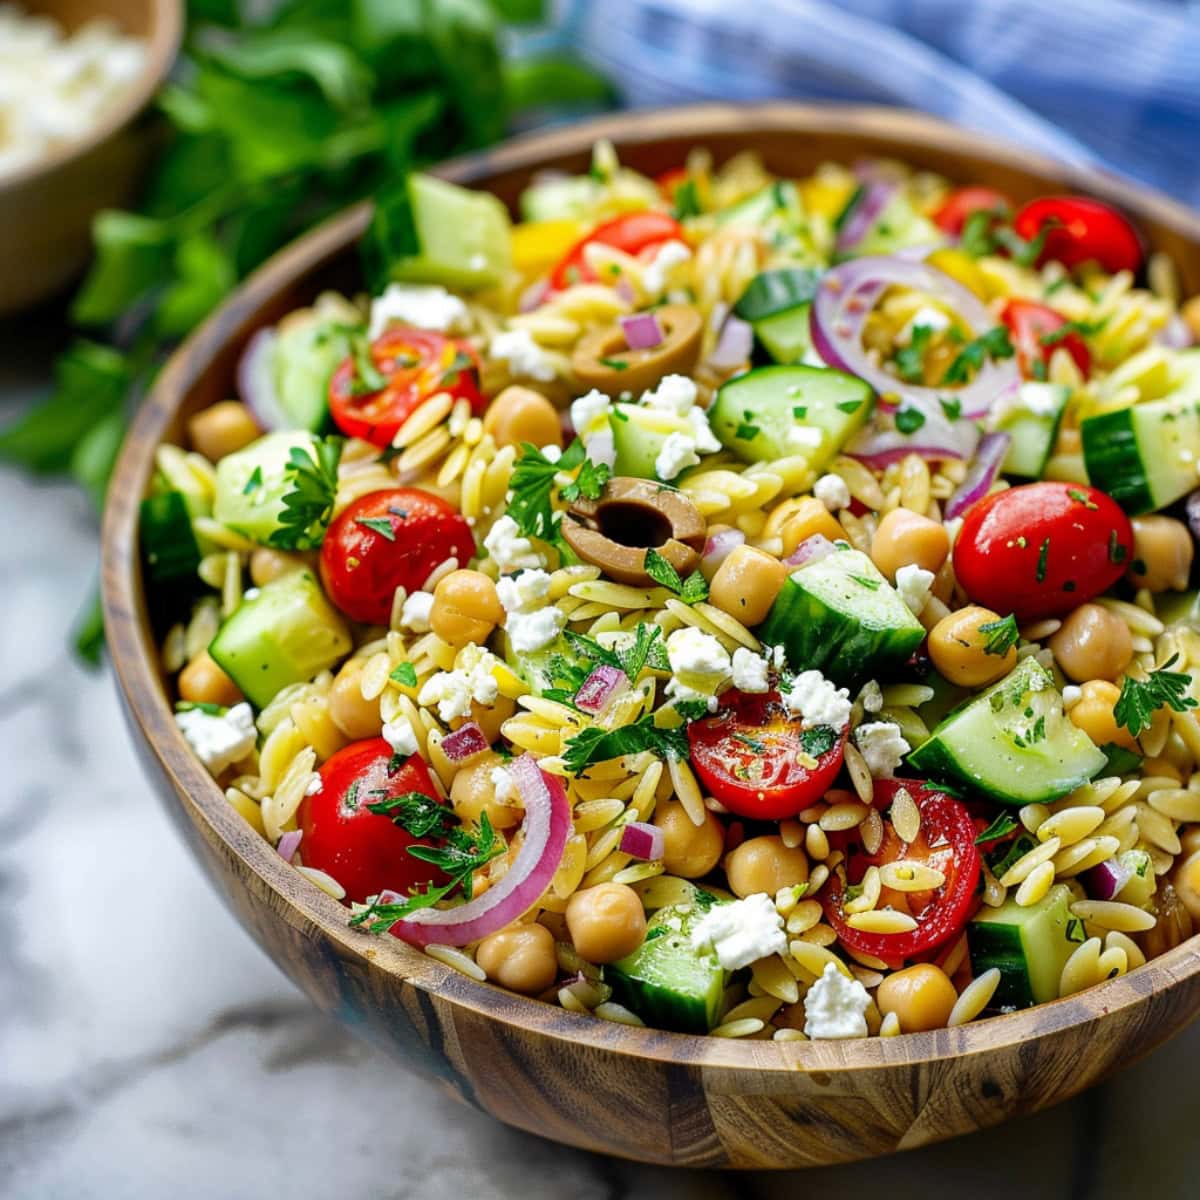 Orzo pasta salad served in a wooden bowl.